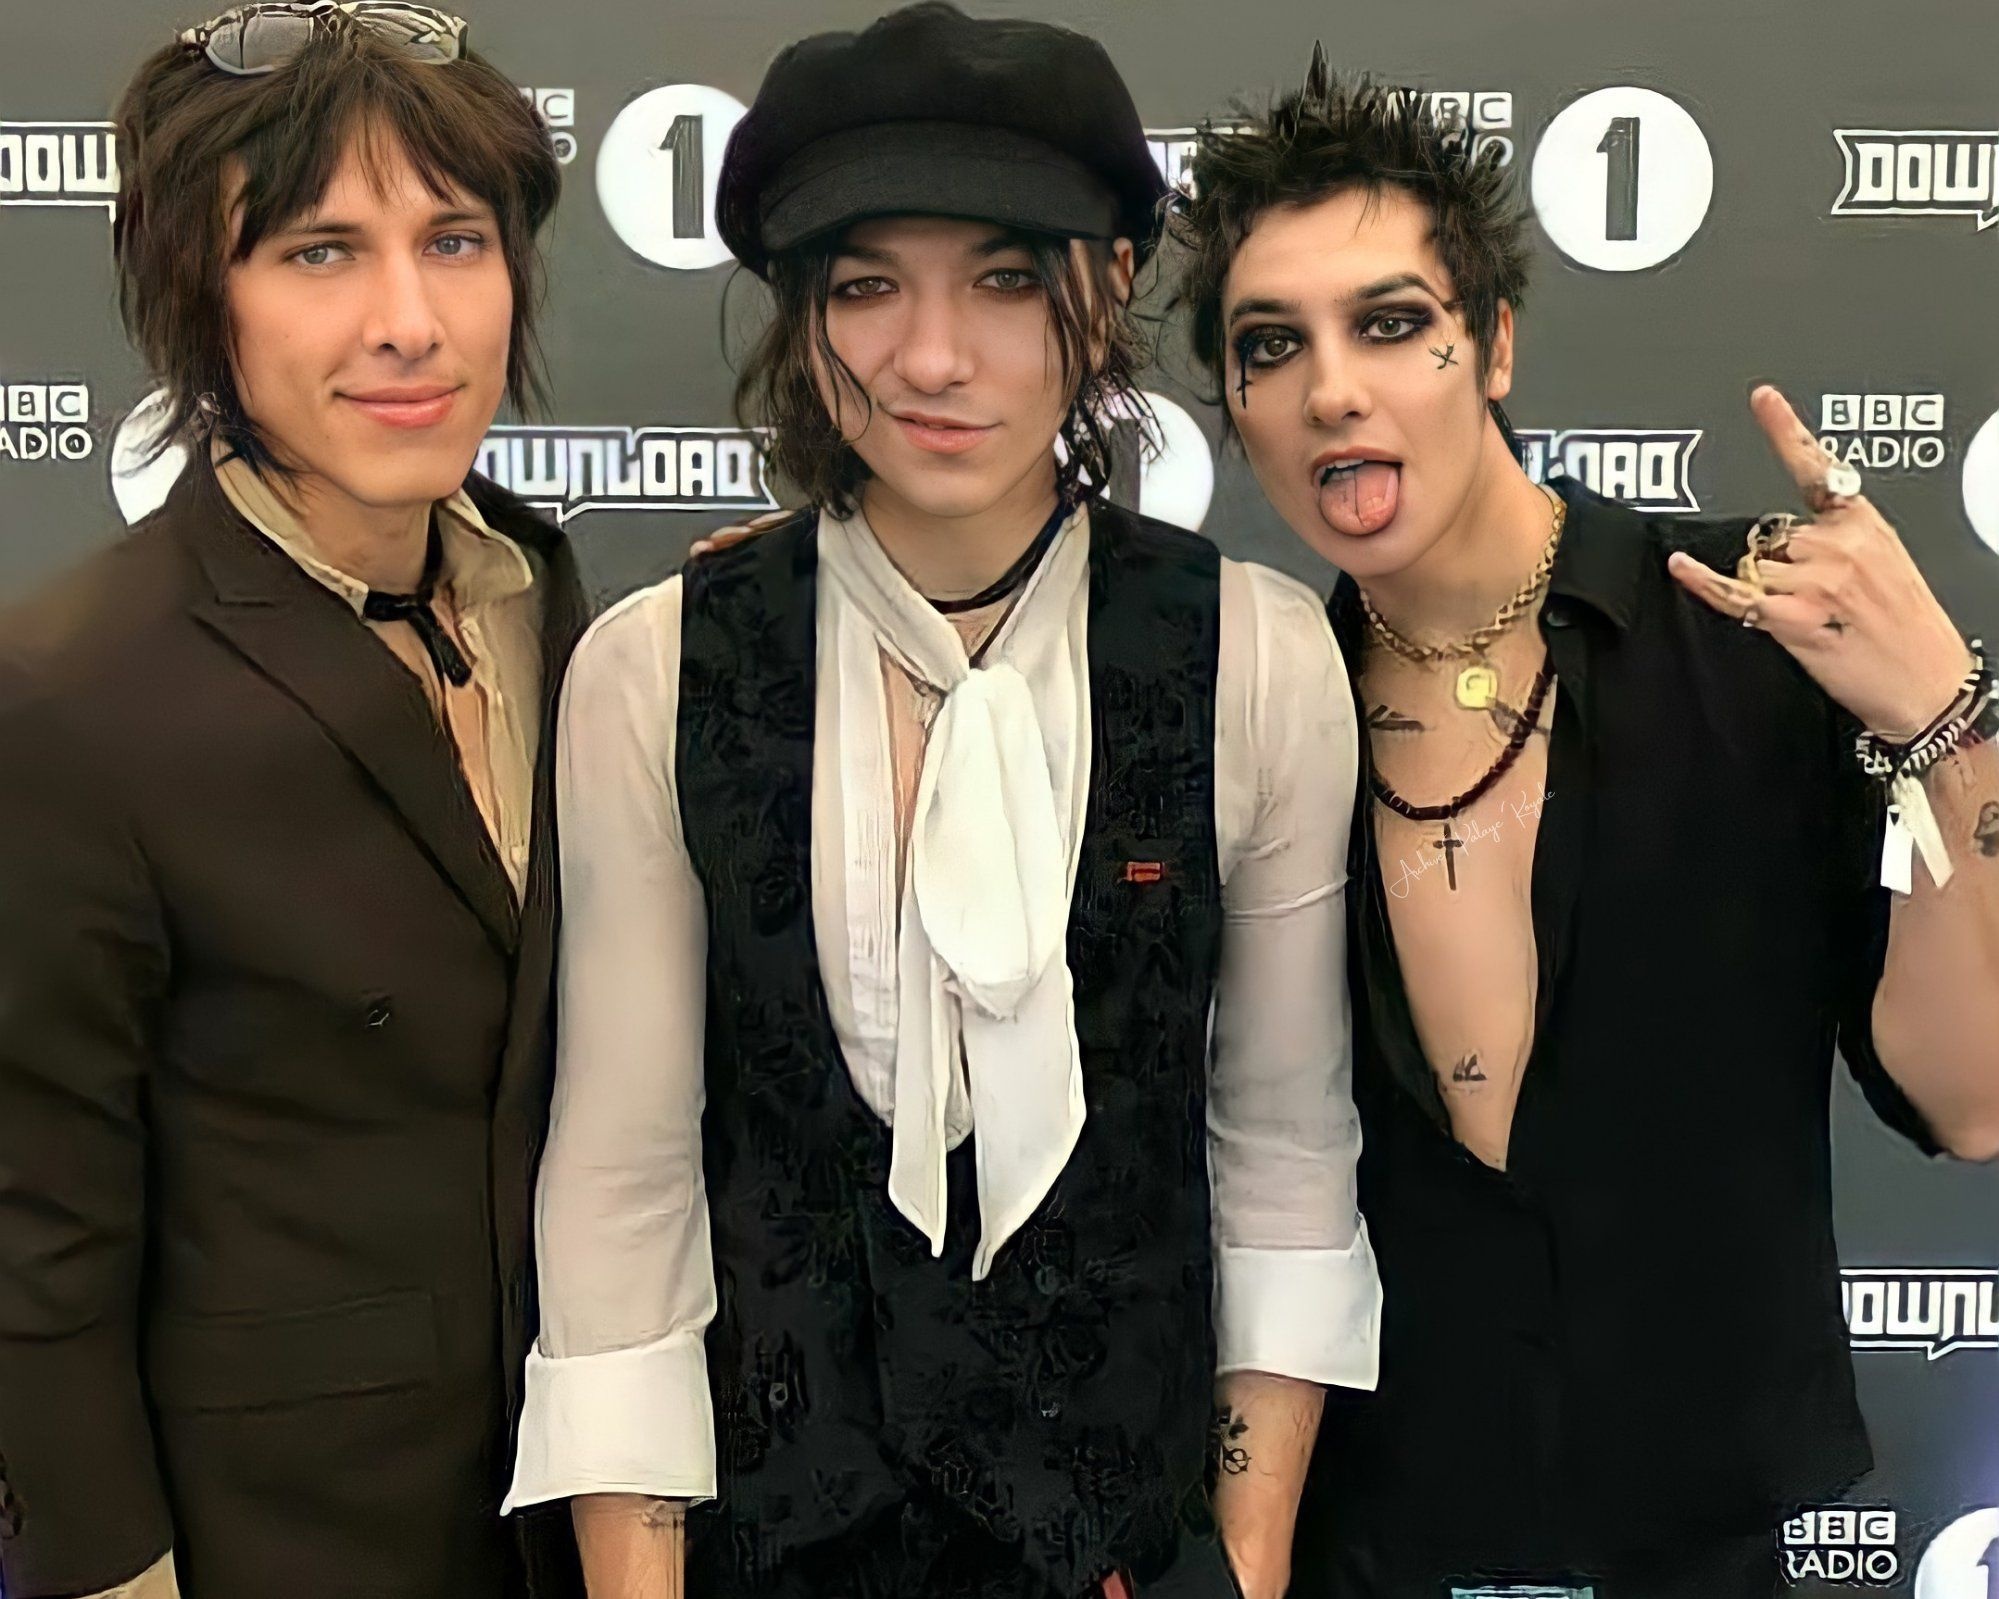 Pin by milana on | Palaye royale, Emerson barrett, Band pictures 2000x1600